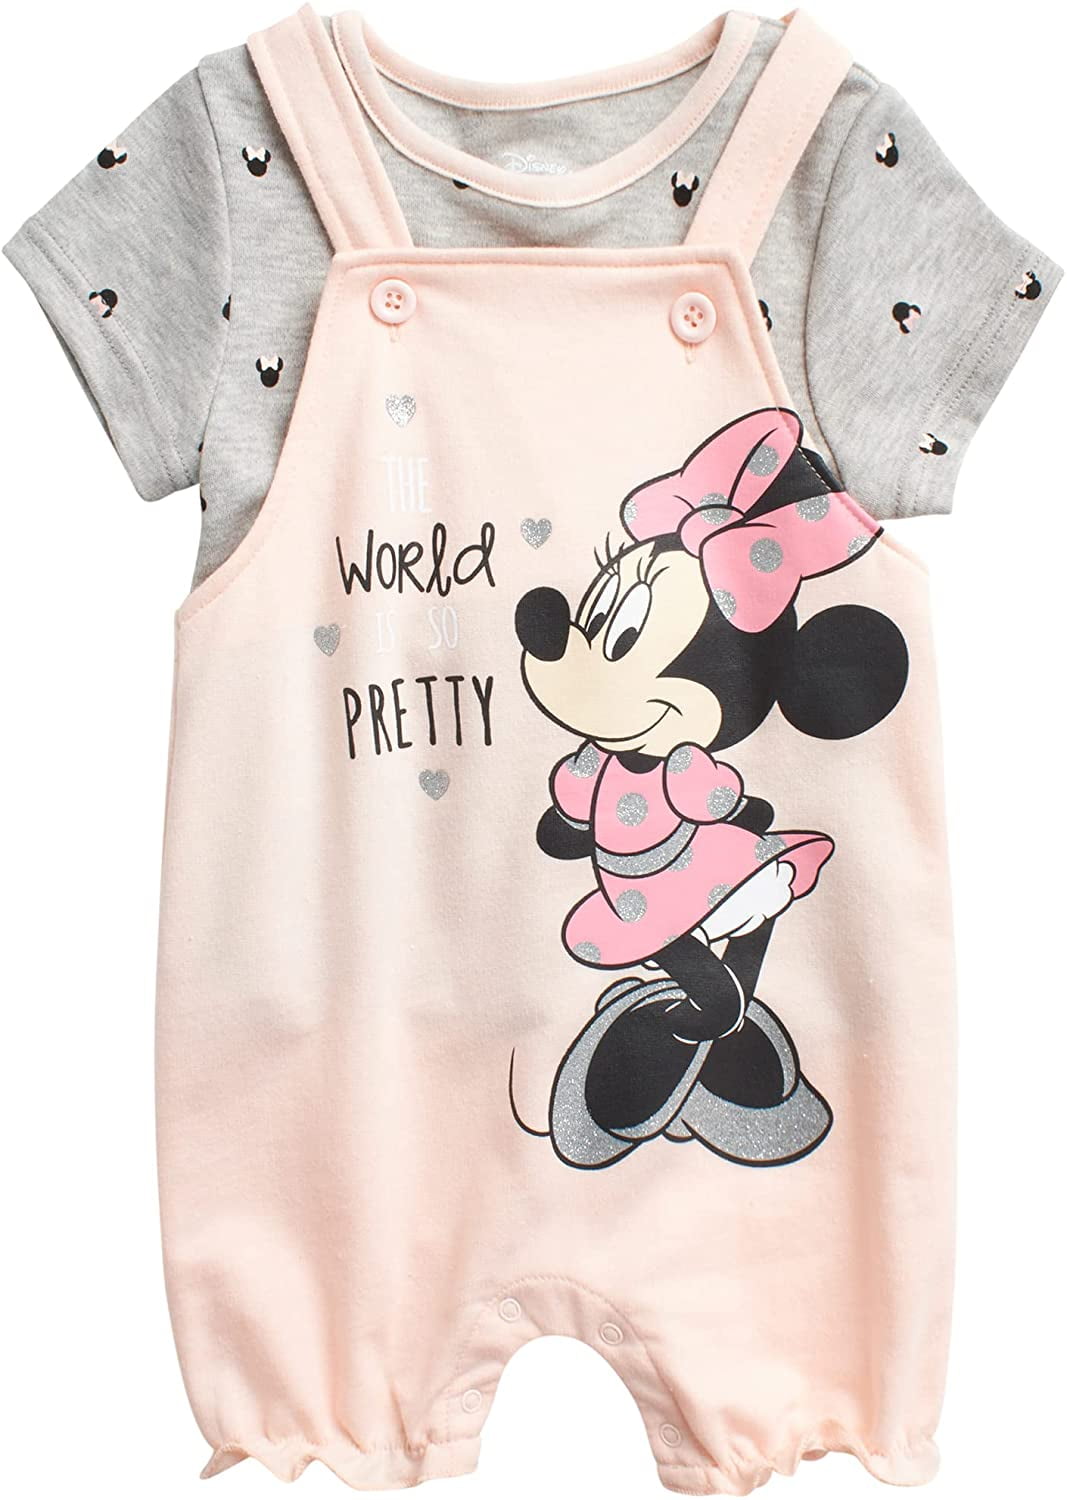 2 Piece Overall T-Shirt Set Winnie The Pooh Disney Baby Girls' Romper Minnie Mouse 